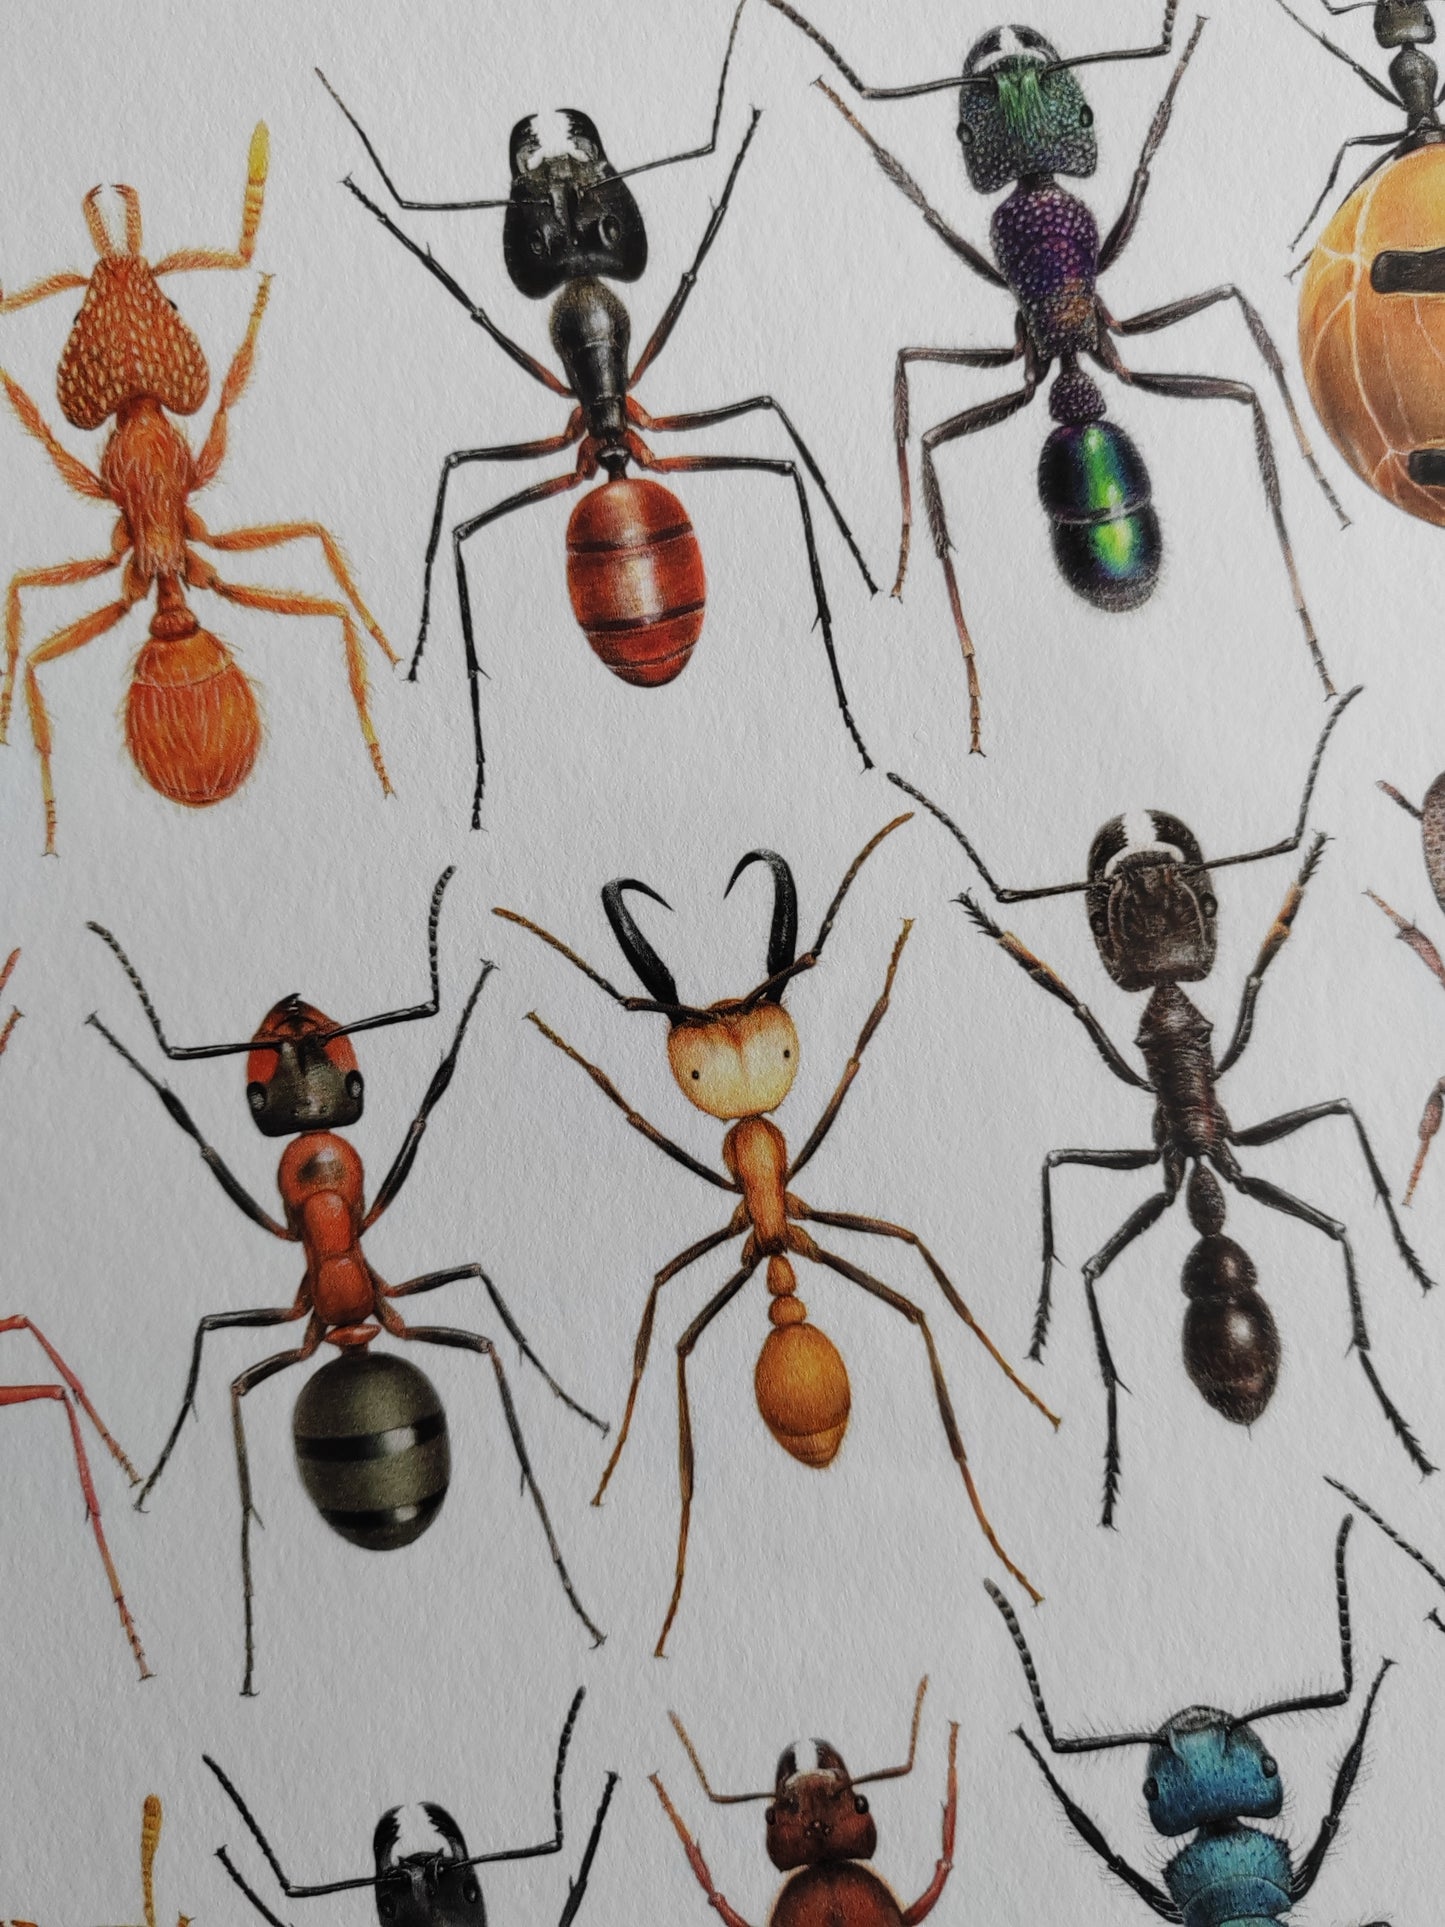 Formicidae, Ants compilation. Limited edition art print A3 size